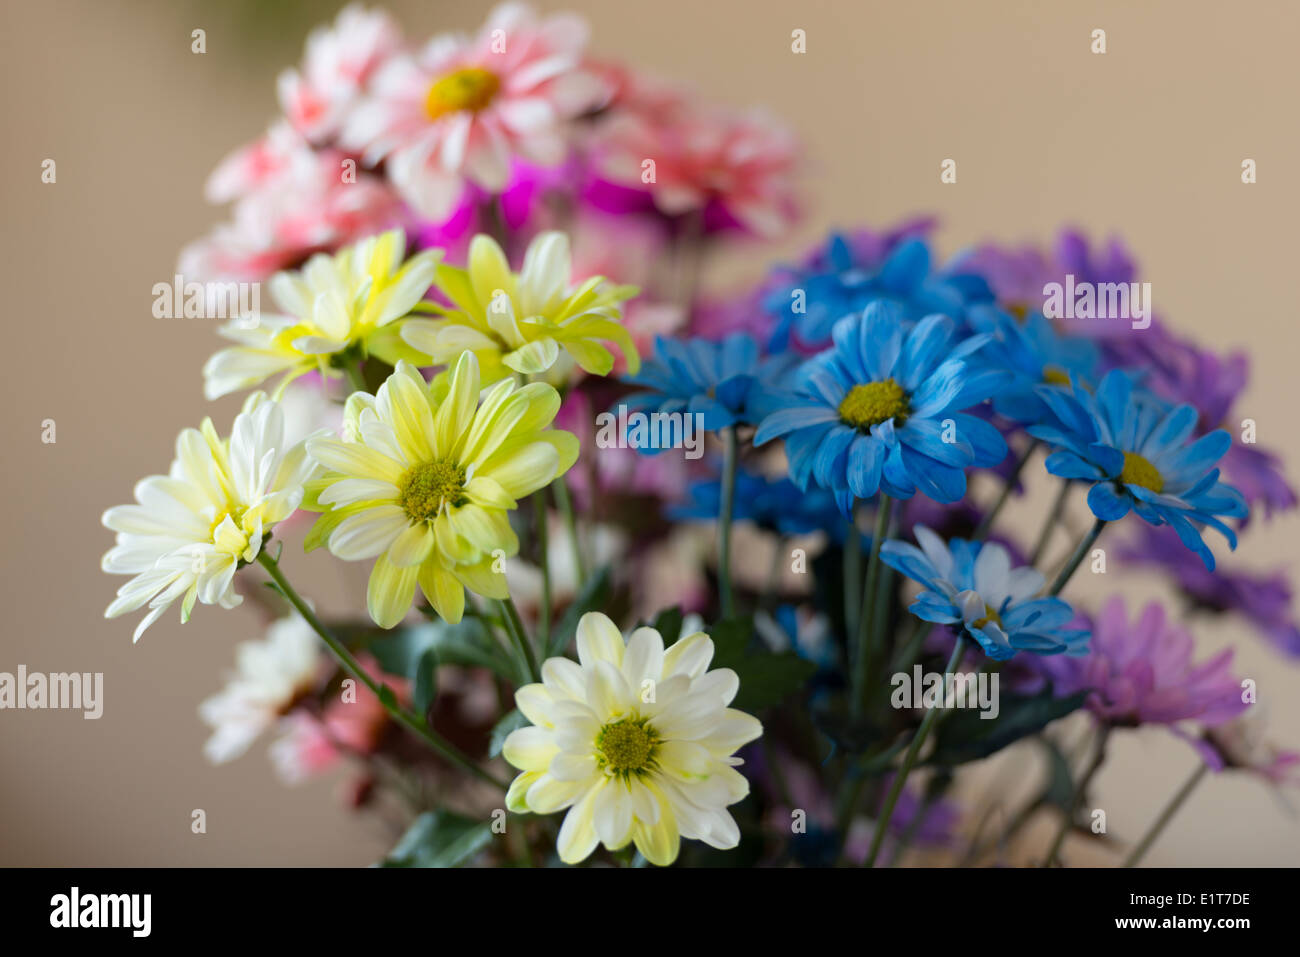 A bouquet of colorful daisy's Stock Photo